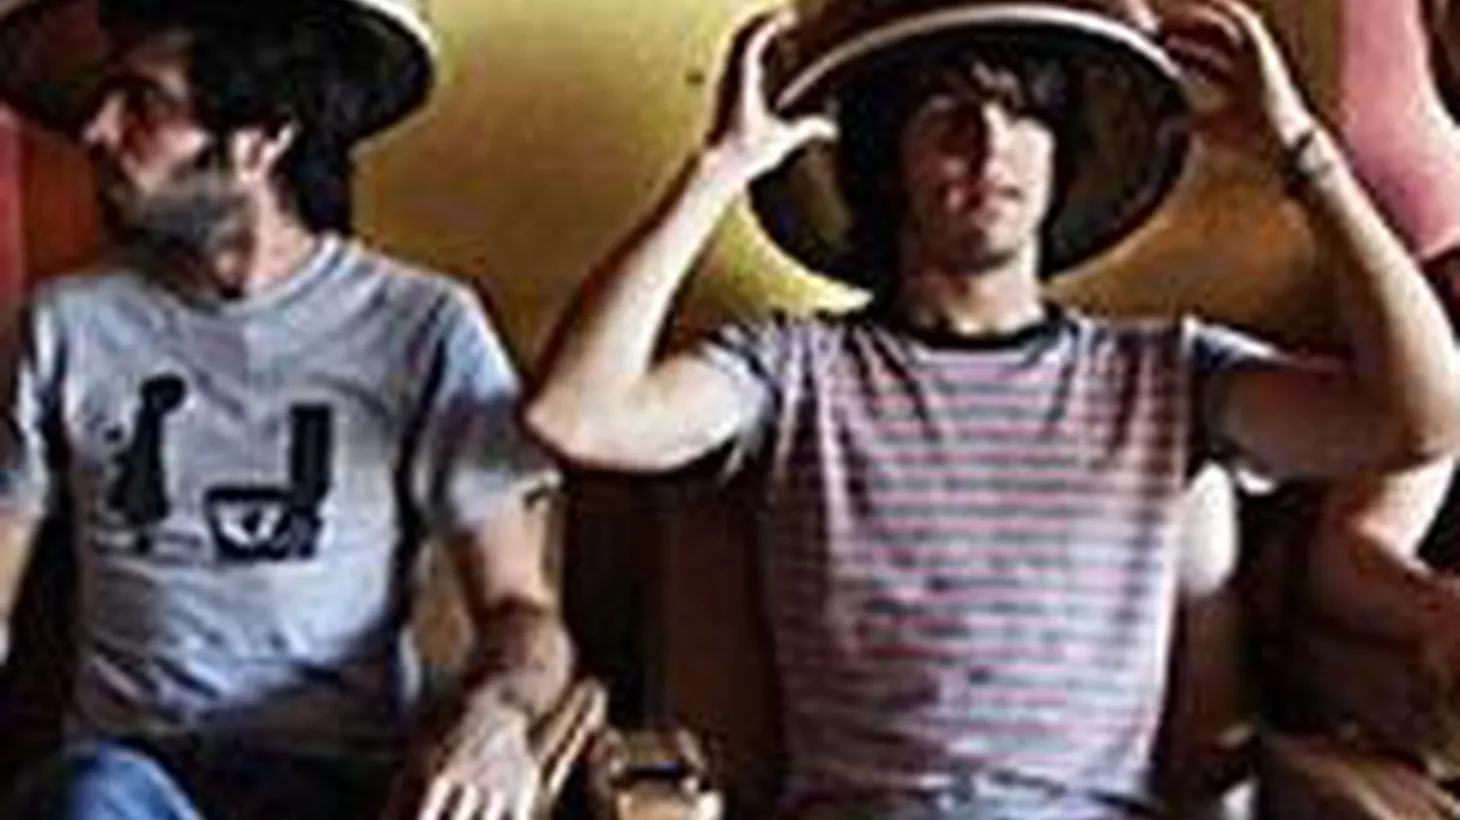 Birdmonster soar with their rock and roll sound Morning Becomes Eclectic at 11:15am.